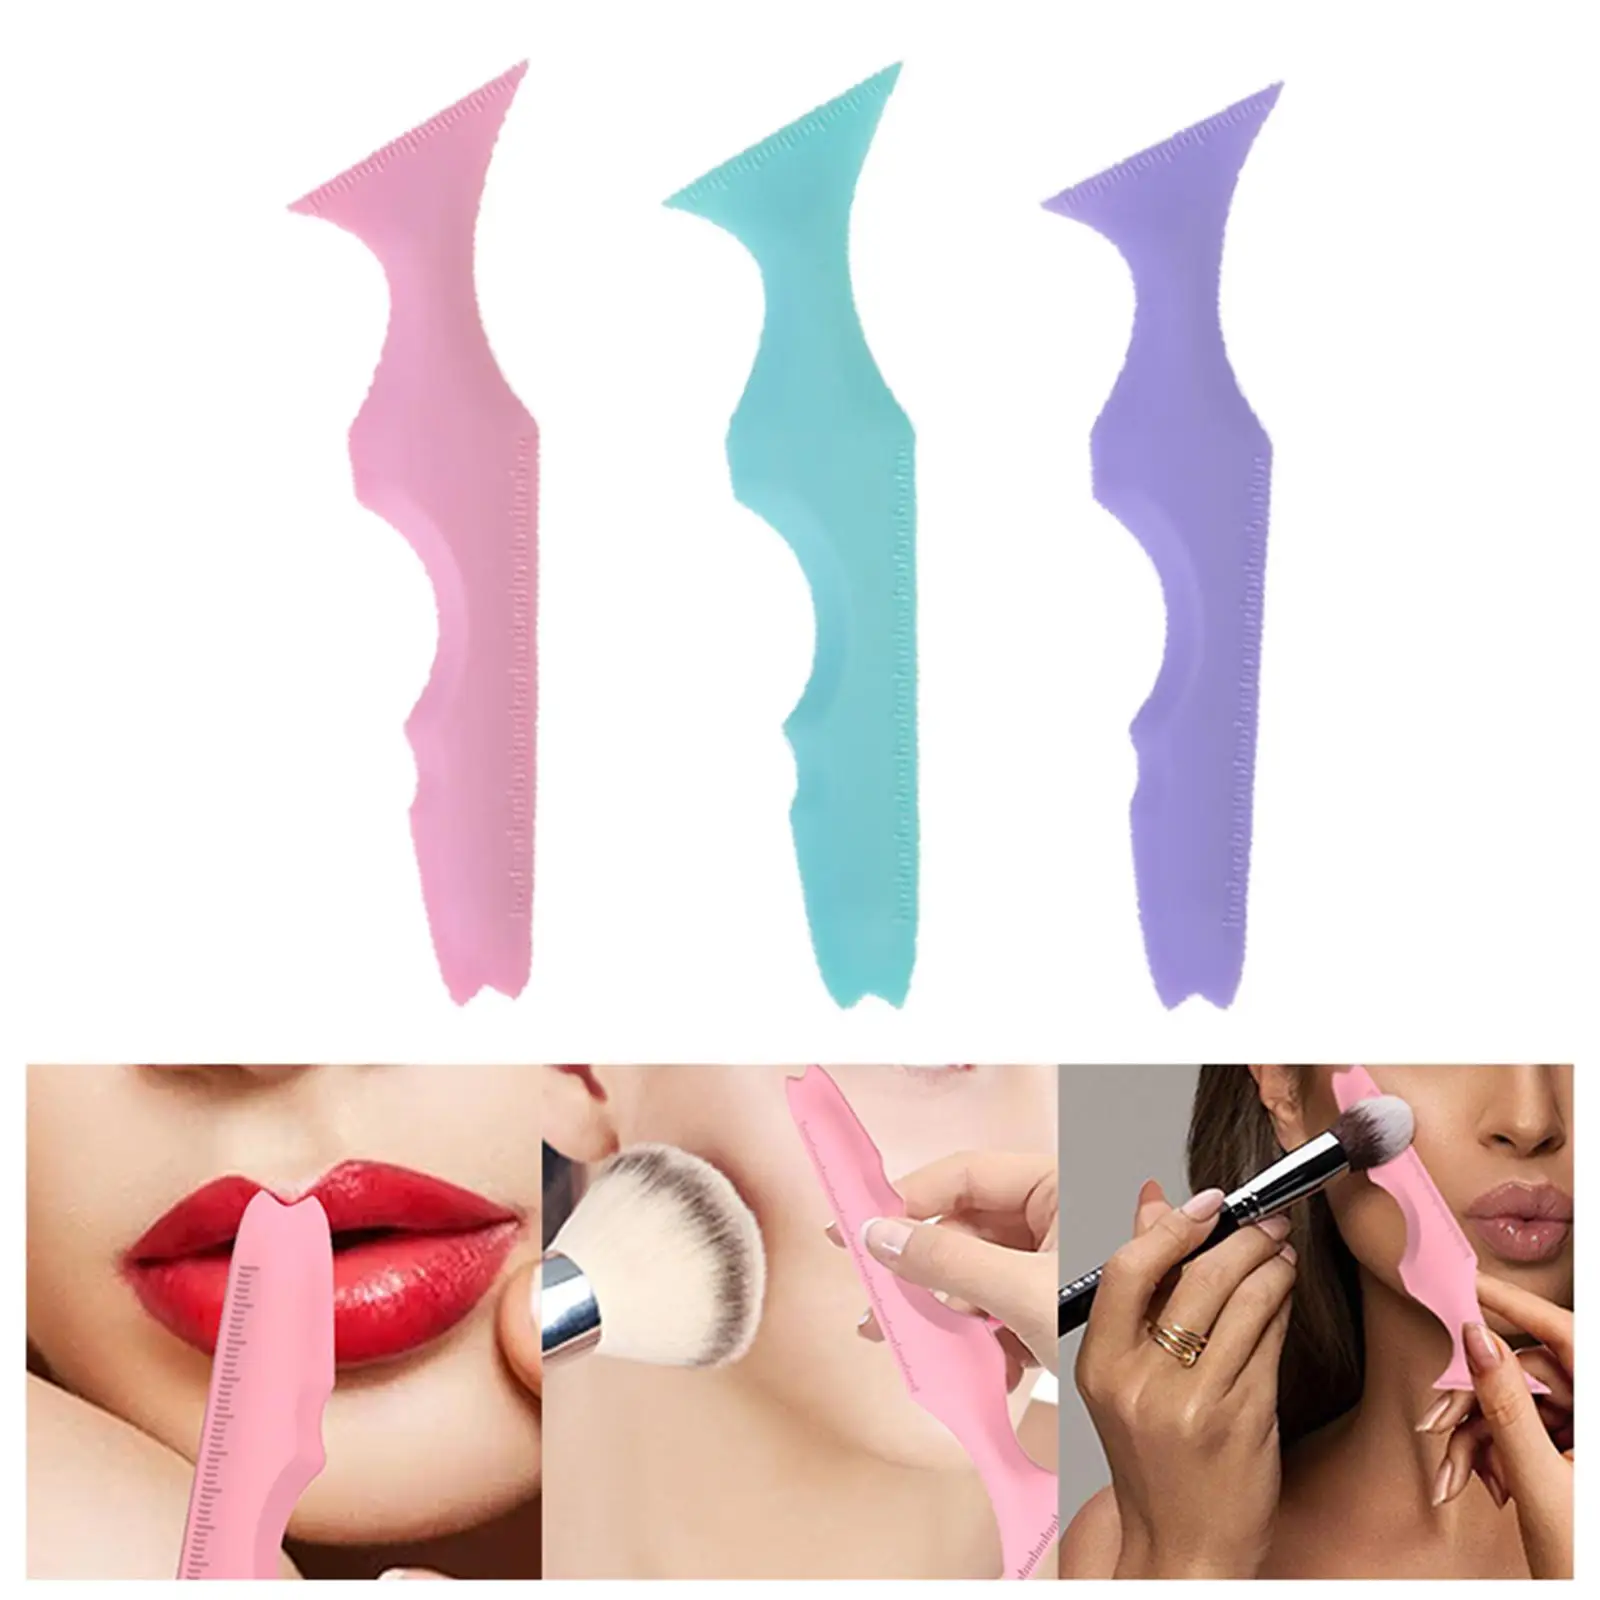 Silicone Eyeliner Stencils Easy to Use Eyeliner Shadow Guide makeup Tool Eyeliner Assistant for Beginners Lady Girls Women